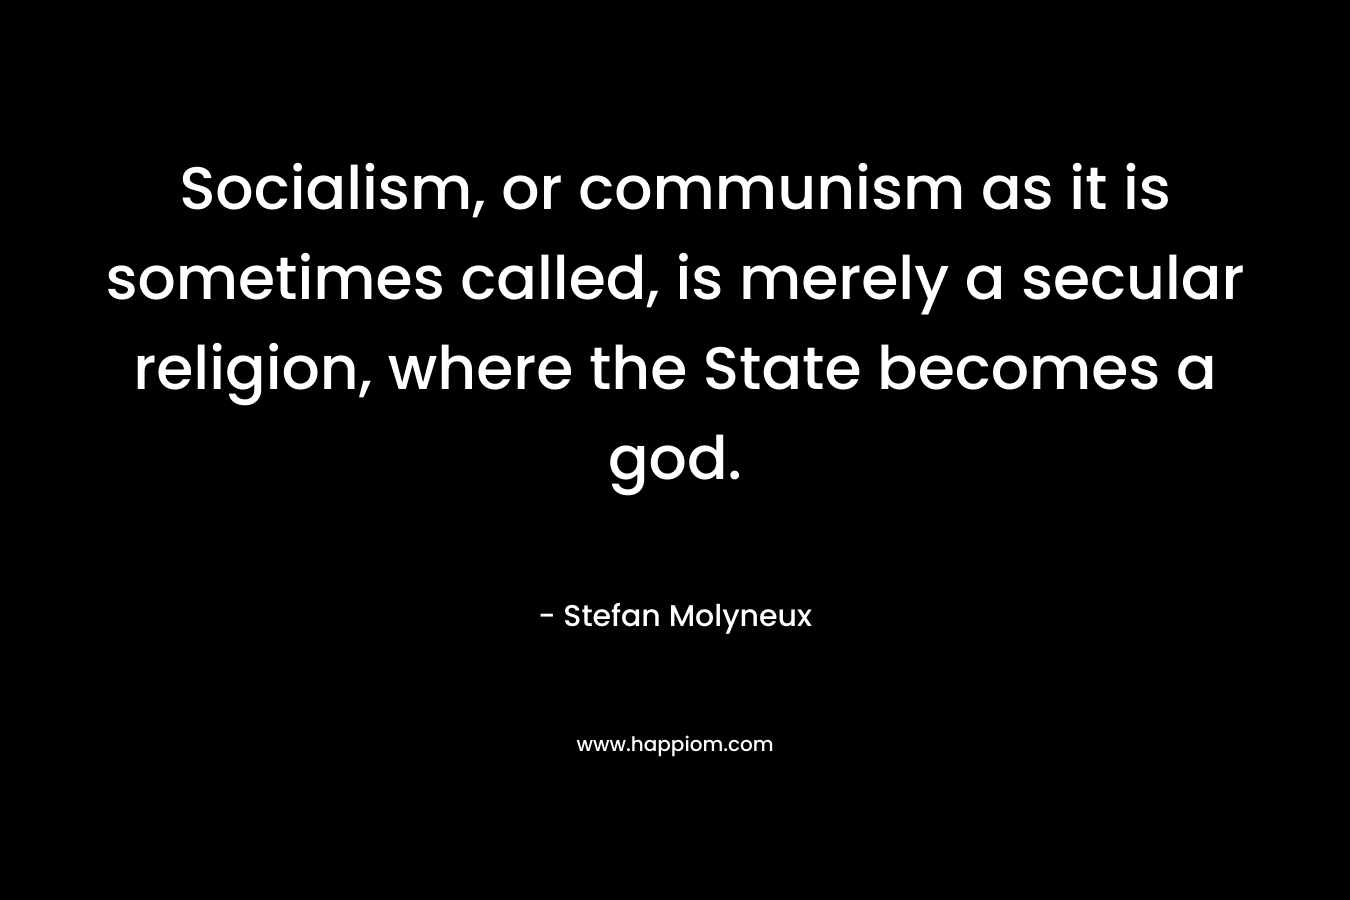 Socialism, or communism as it is sometimes called, is merely a secular religion, where the State becomes a god. – Stefan Molyneux